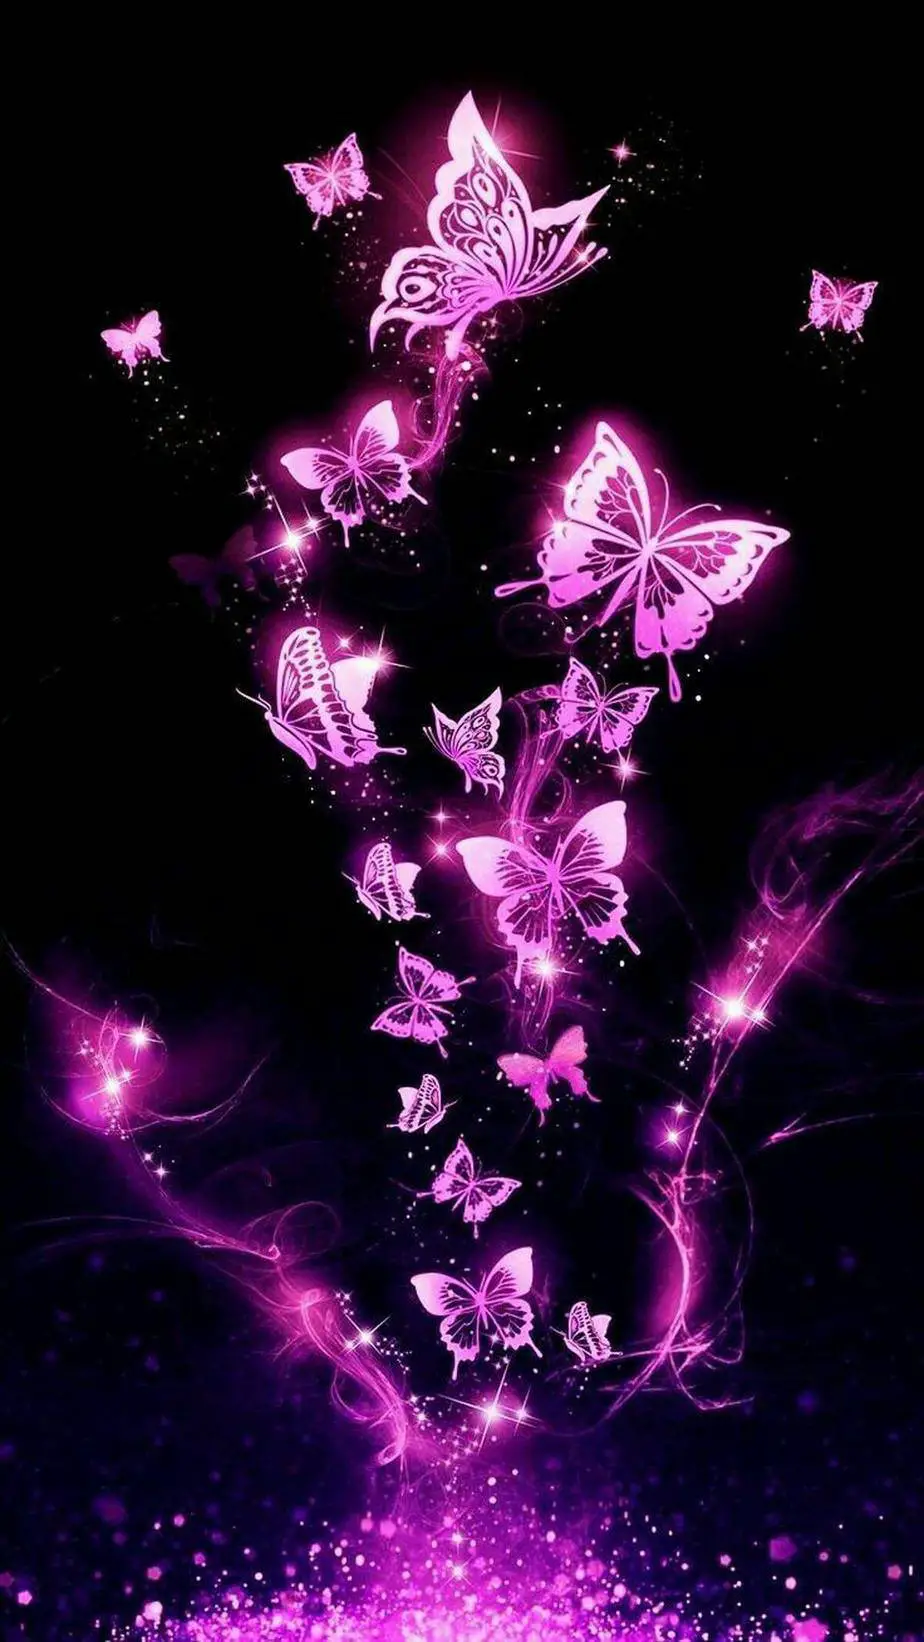 Beautiful butterfly wallpaper background to add to your collection. Butterfly wallpaper| butterfly wallpapers are so pretty, plus the butterfly wallpaper aesthetic is a must. Cool butterfly wallpaper iphone | cute butterfly wallpaper iphone | butterfly wallpaper iphone aesthetic for your every mood. It's know you love colorful butterflies wallpaper and aesthetic wallpaper iphone. So check out some more here! #wallpaper #butterflywallpaper #butterflywallpaperbackground #butterflywallpaperaesthetic